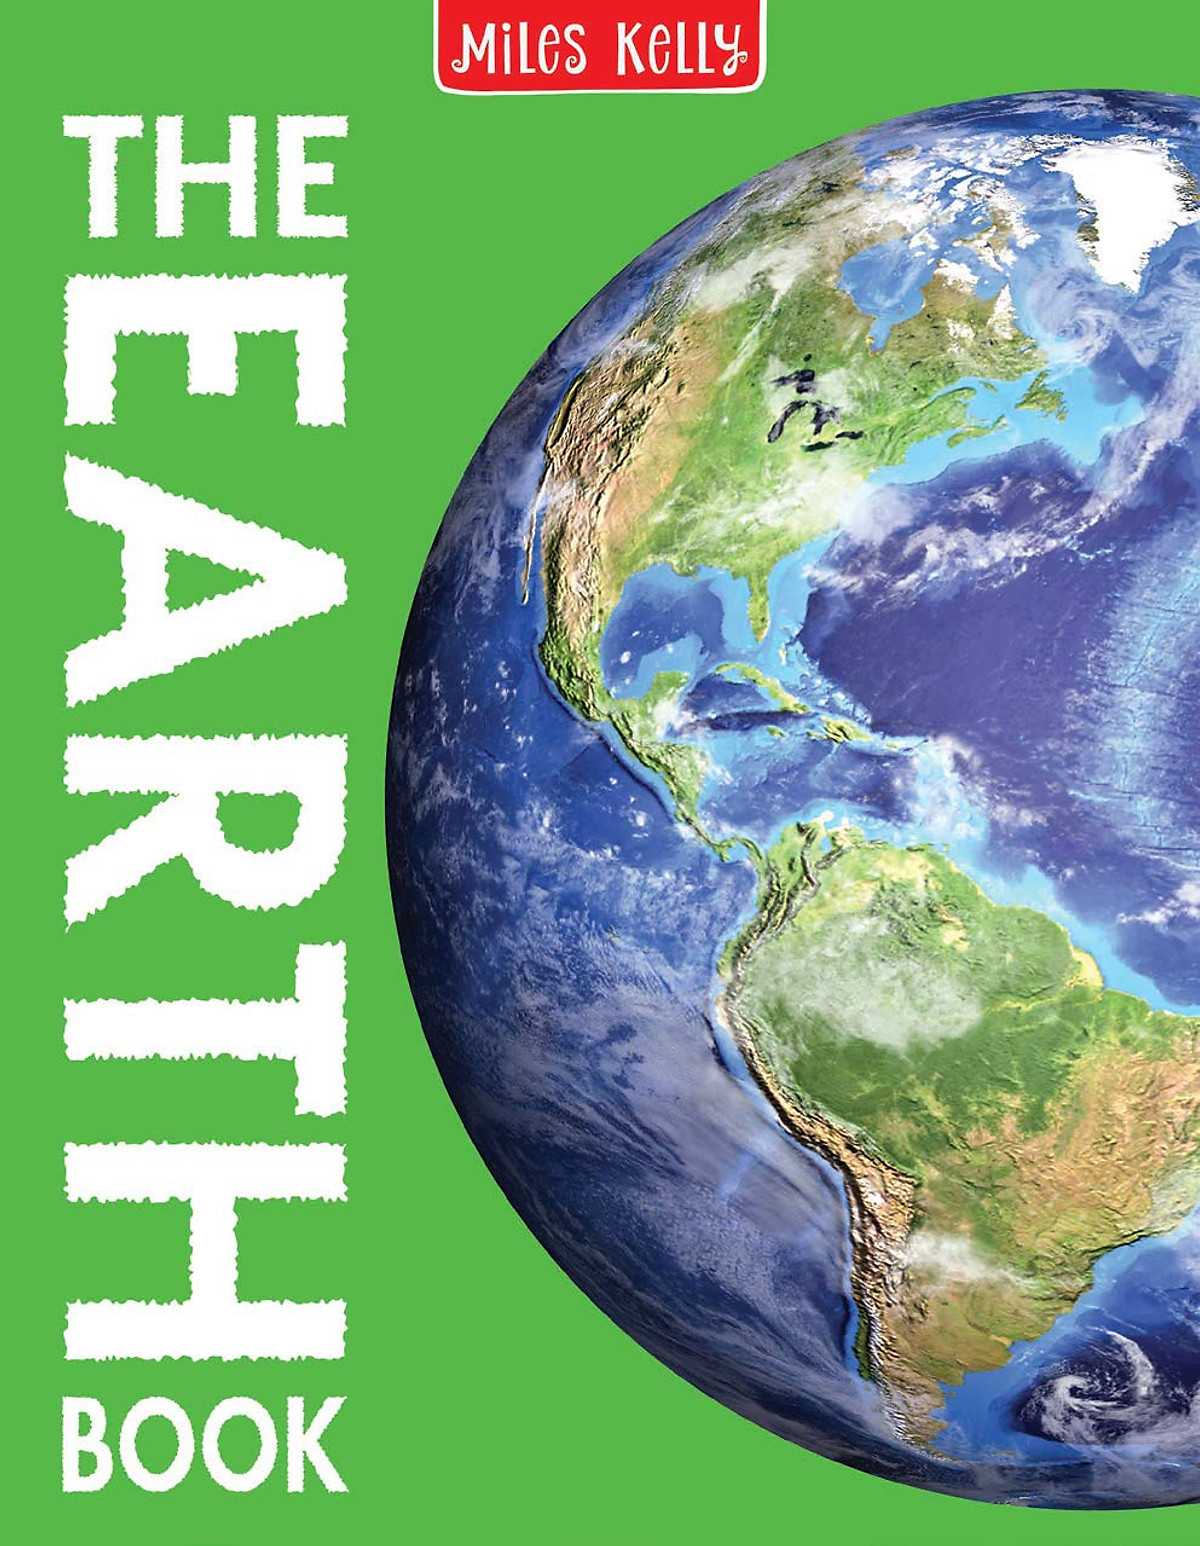 The Earth Book (Hardcover)